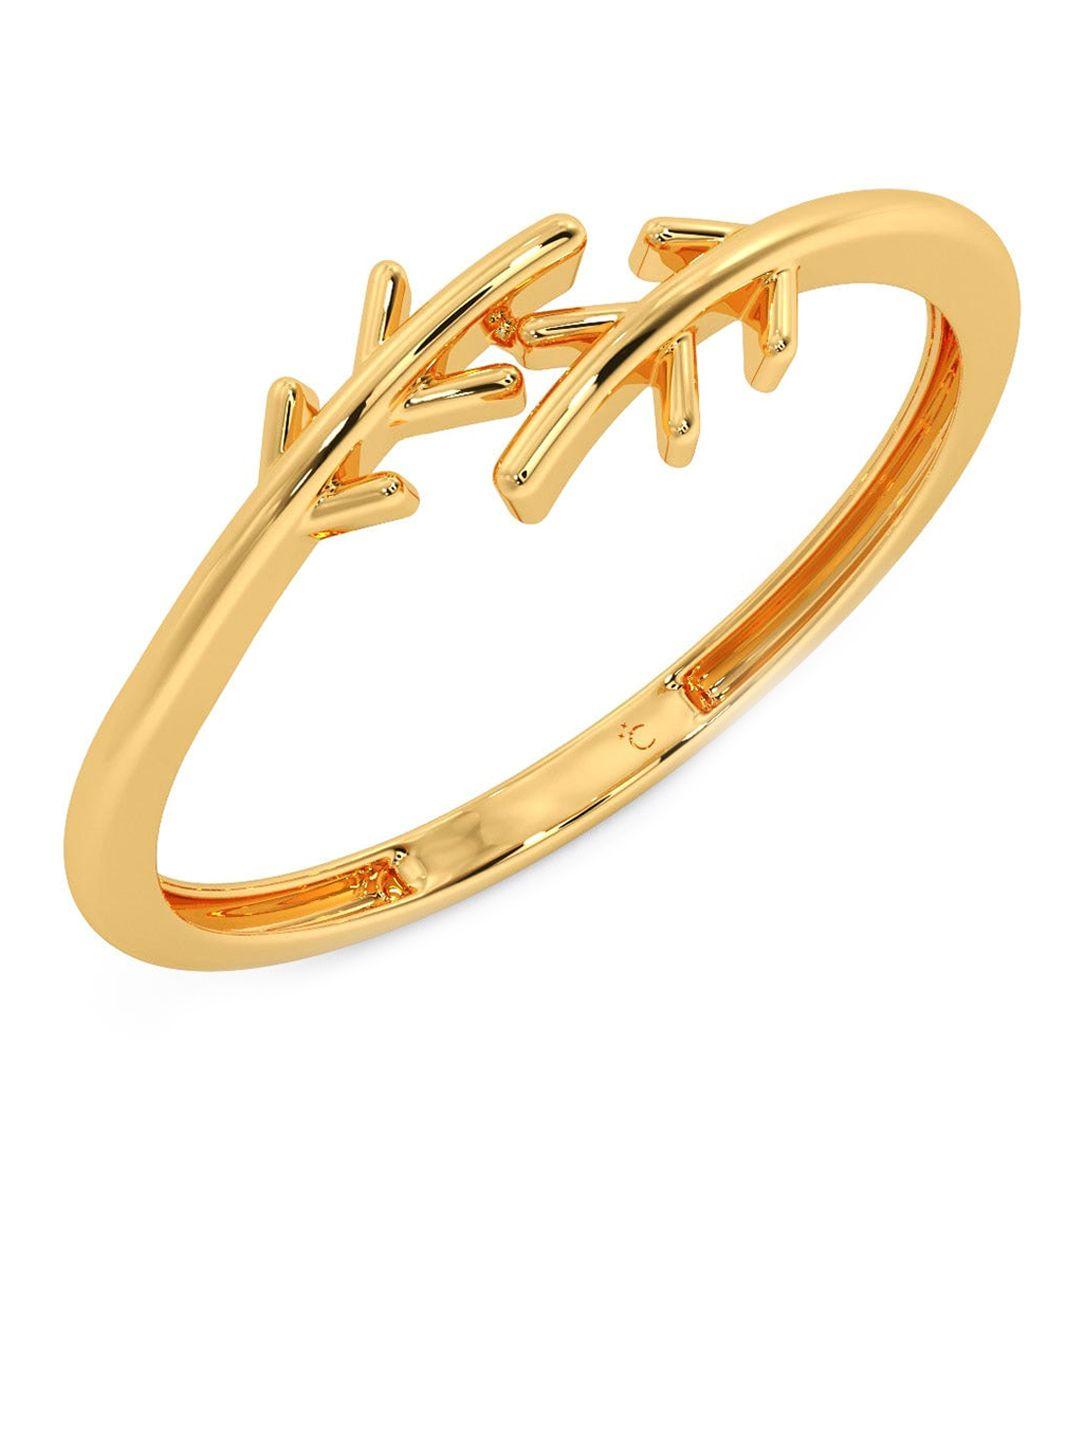 CANDERE A KALYAN JEWELLERS COMPANY 18KT Gold Ring-0.95gm